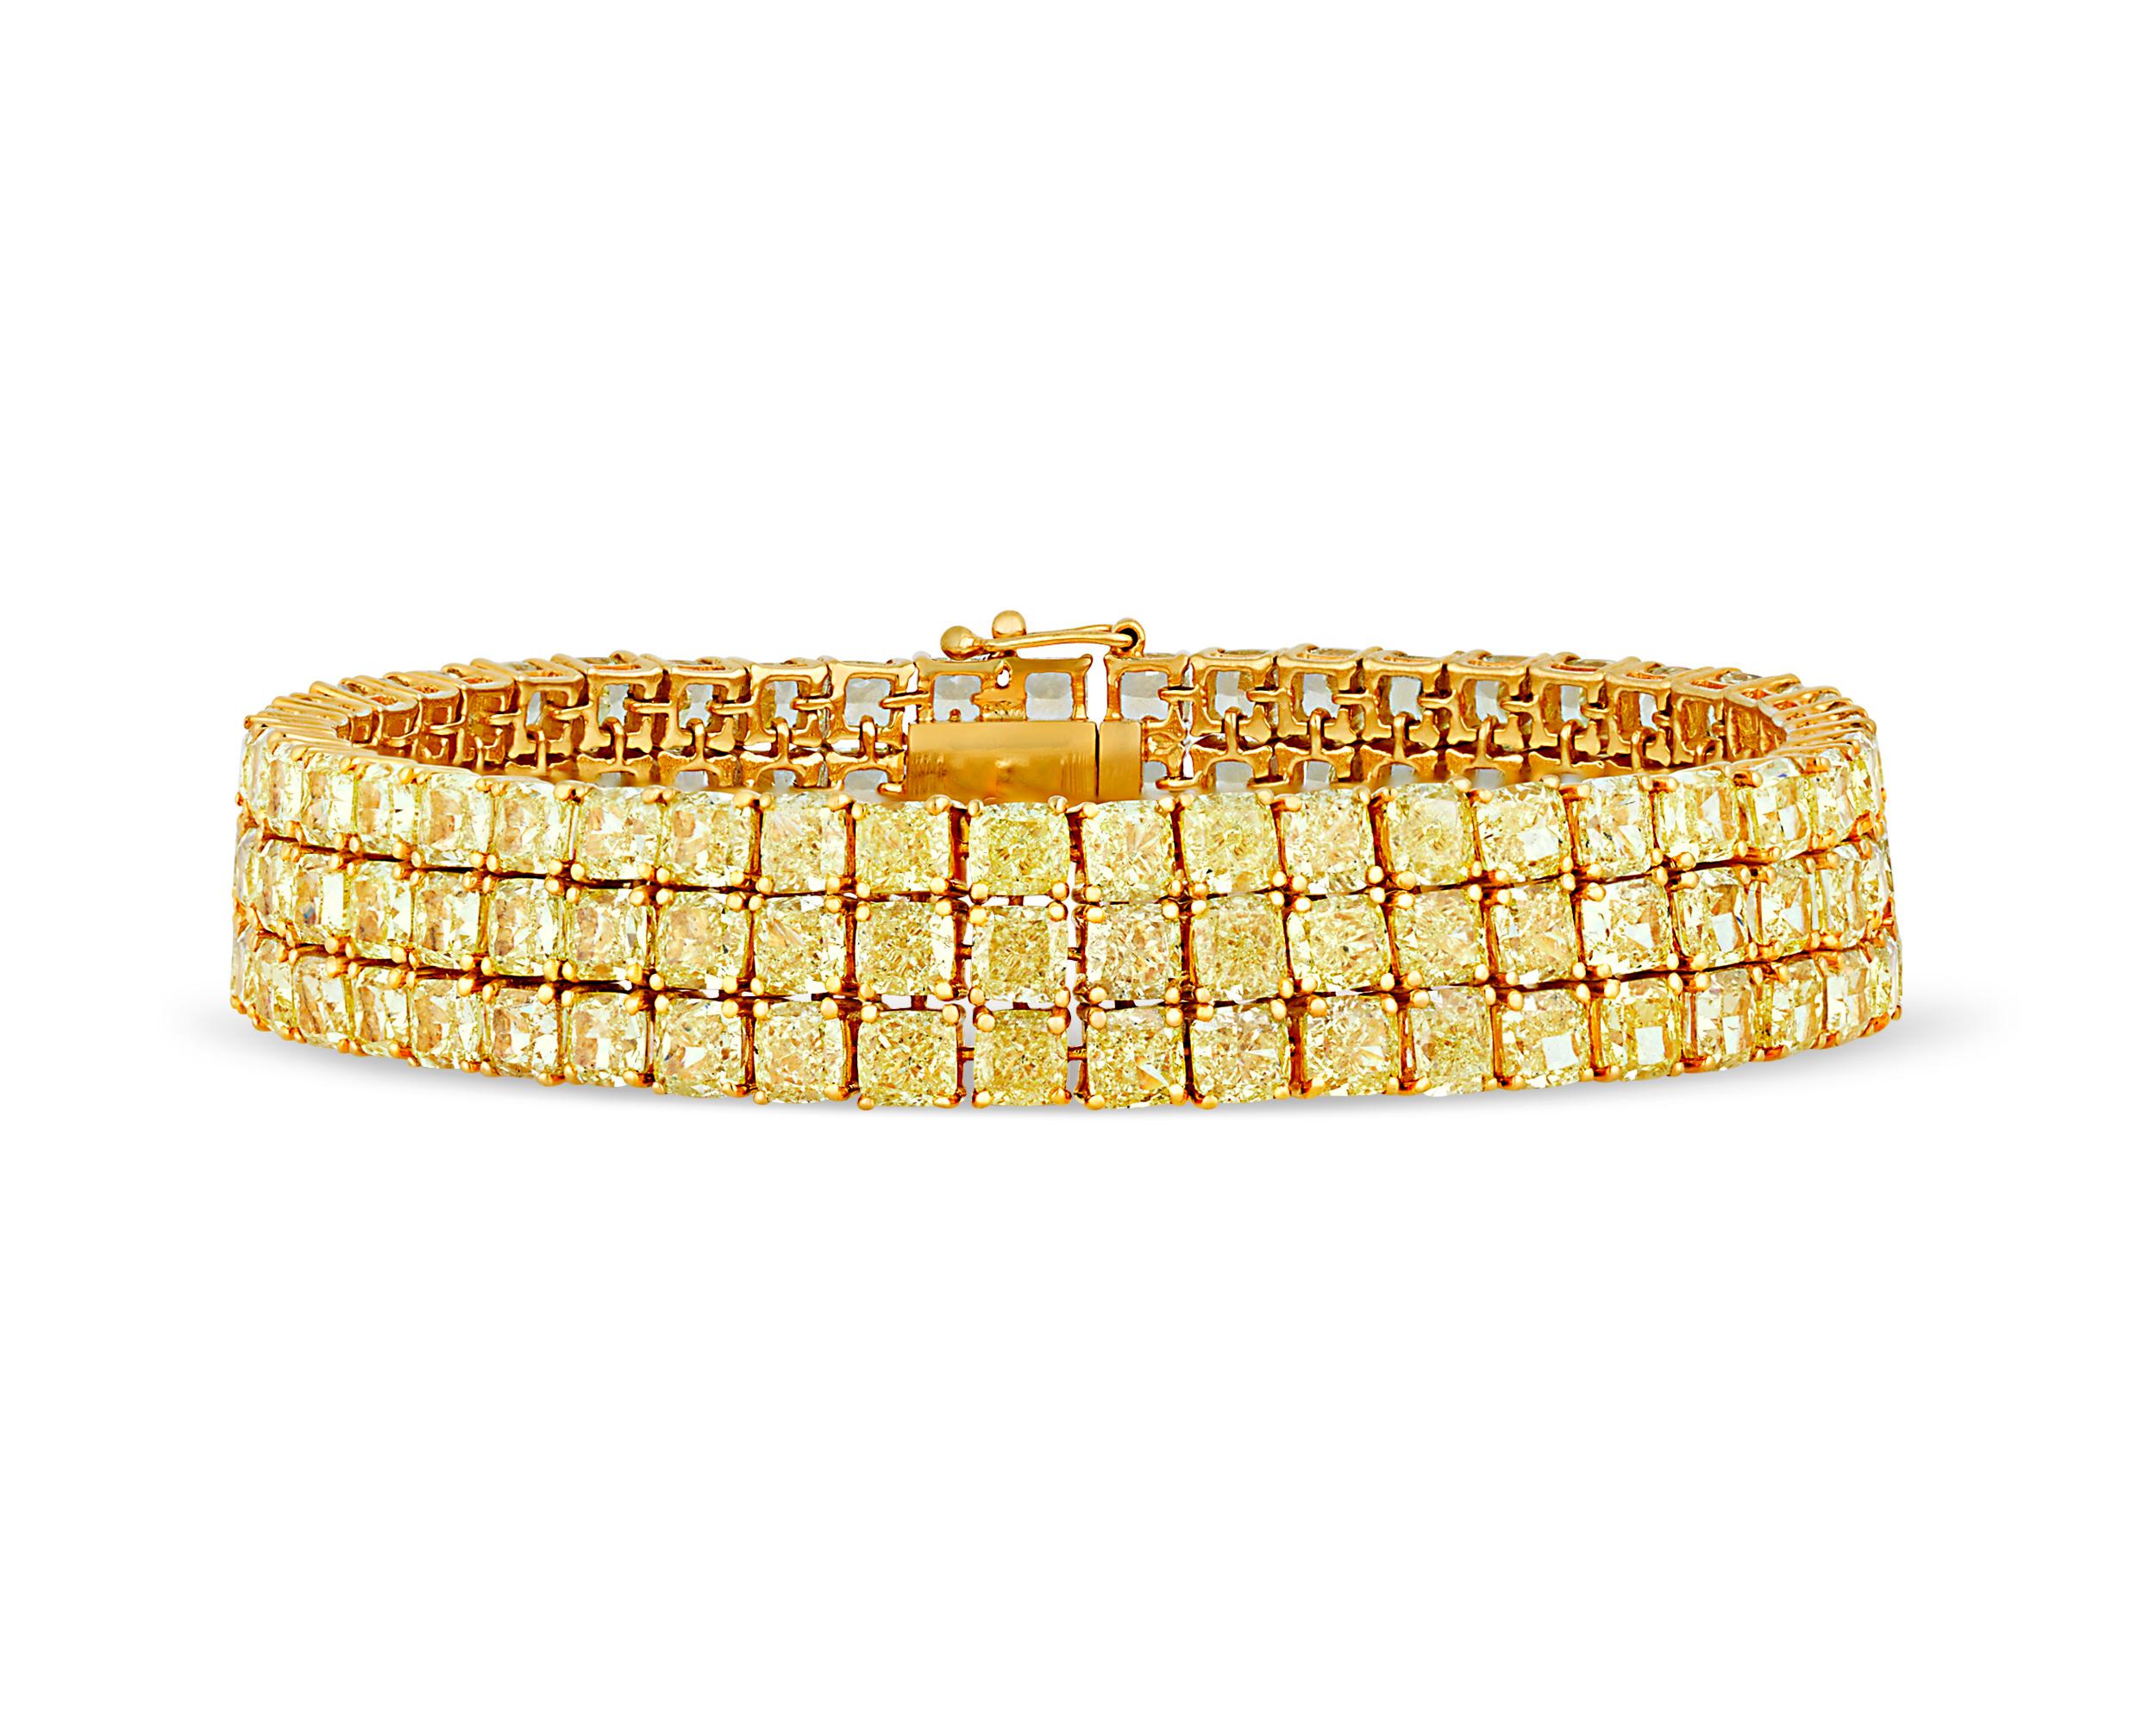 Brilliant fancy intense yellow diamonds line the entire length of this tennis bracelet. This classic jewelry creation features an incredible 141 of these perfectly-matched jewels totaling 41.43 carats, each mounted in neat rows in an 18K gold